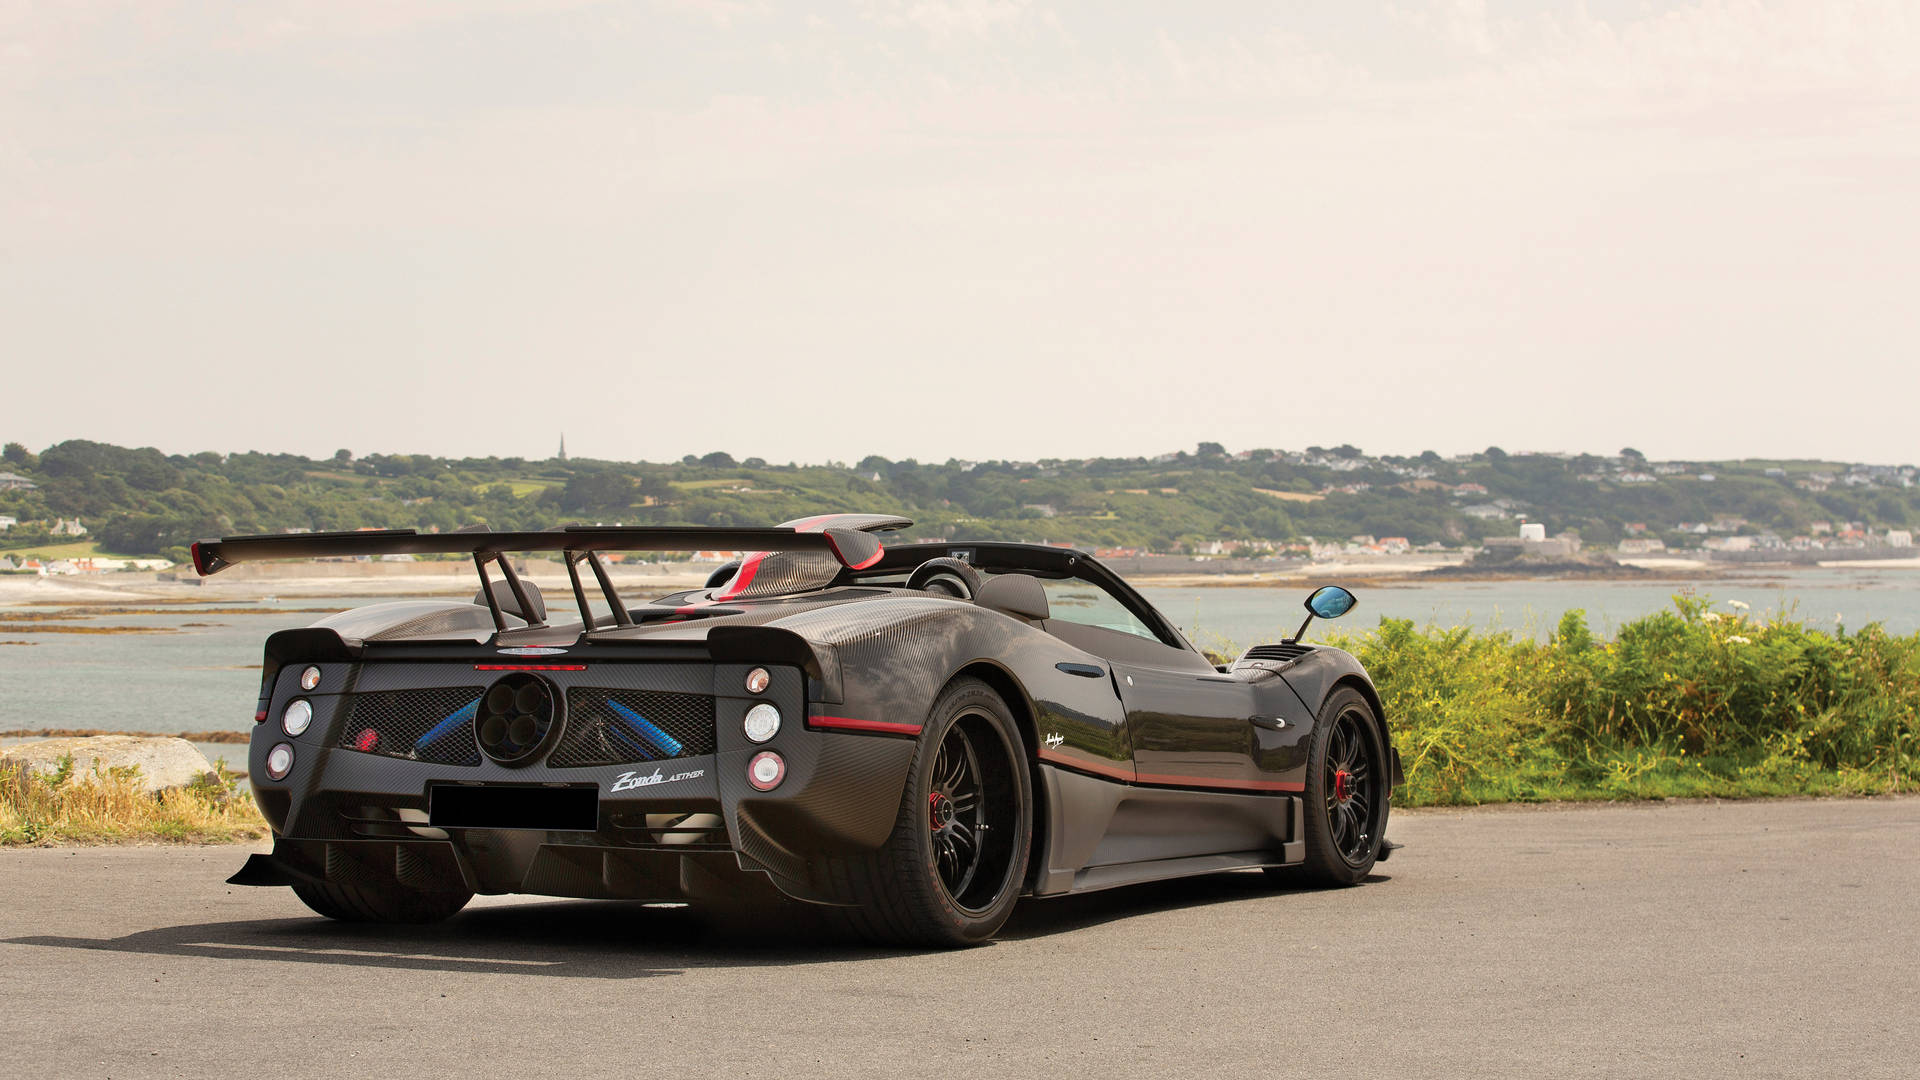 Supercar Zonda Ather Pagani From Iphone Background